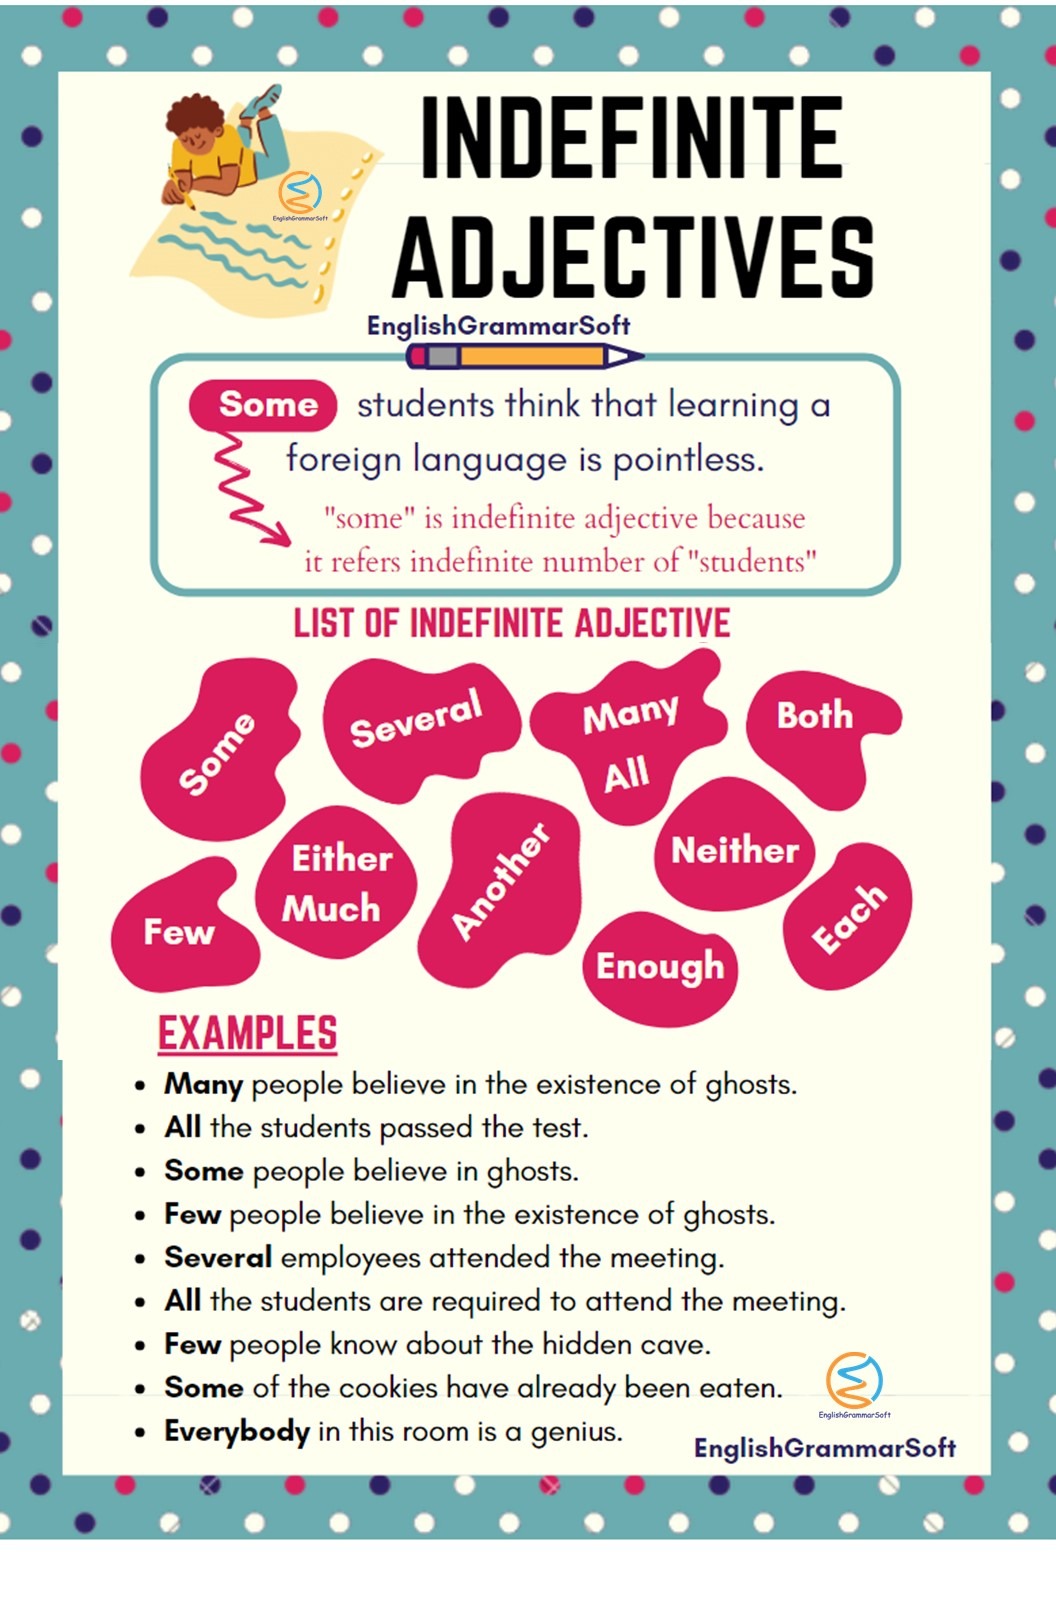 Indefinite Adjective Examples and List